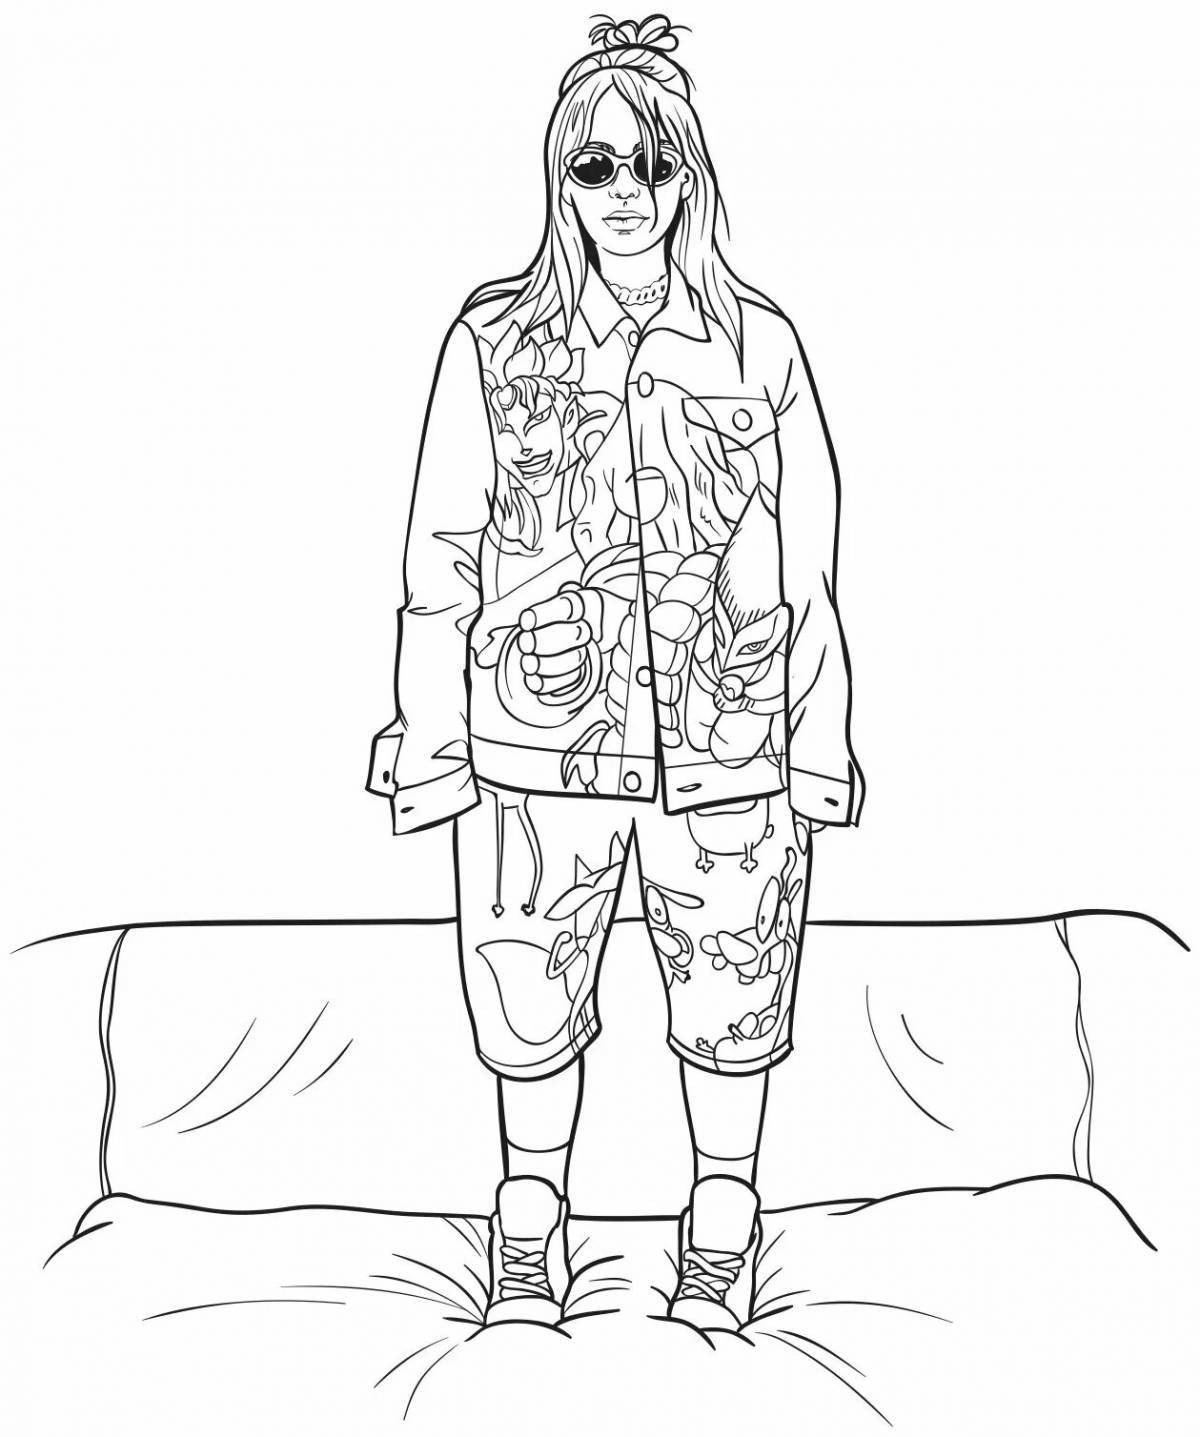 Billie Eilish's intriguing coloring page